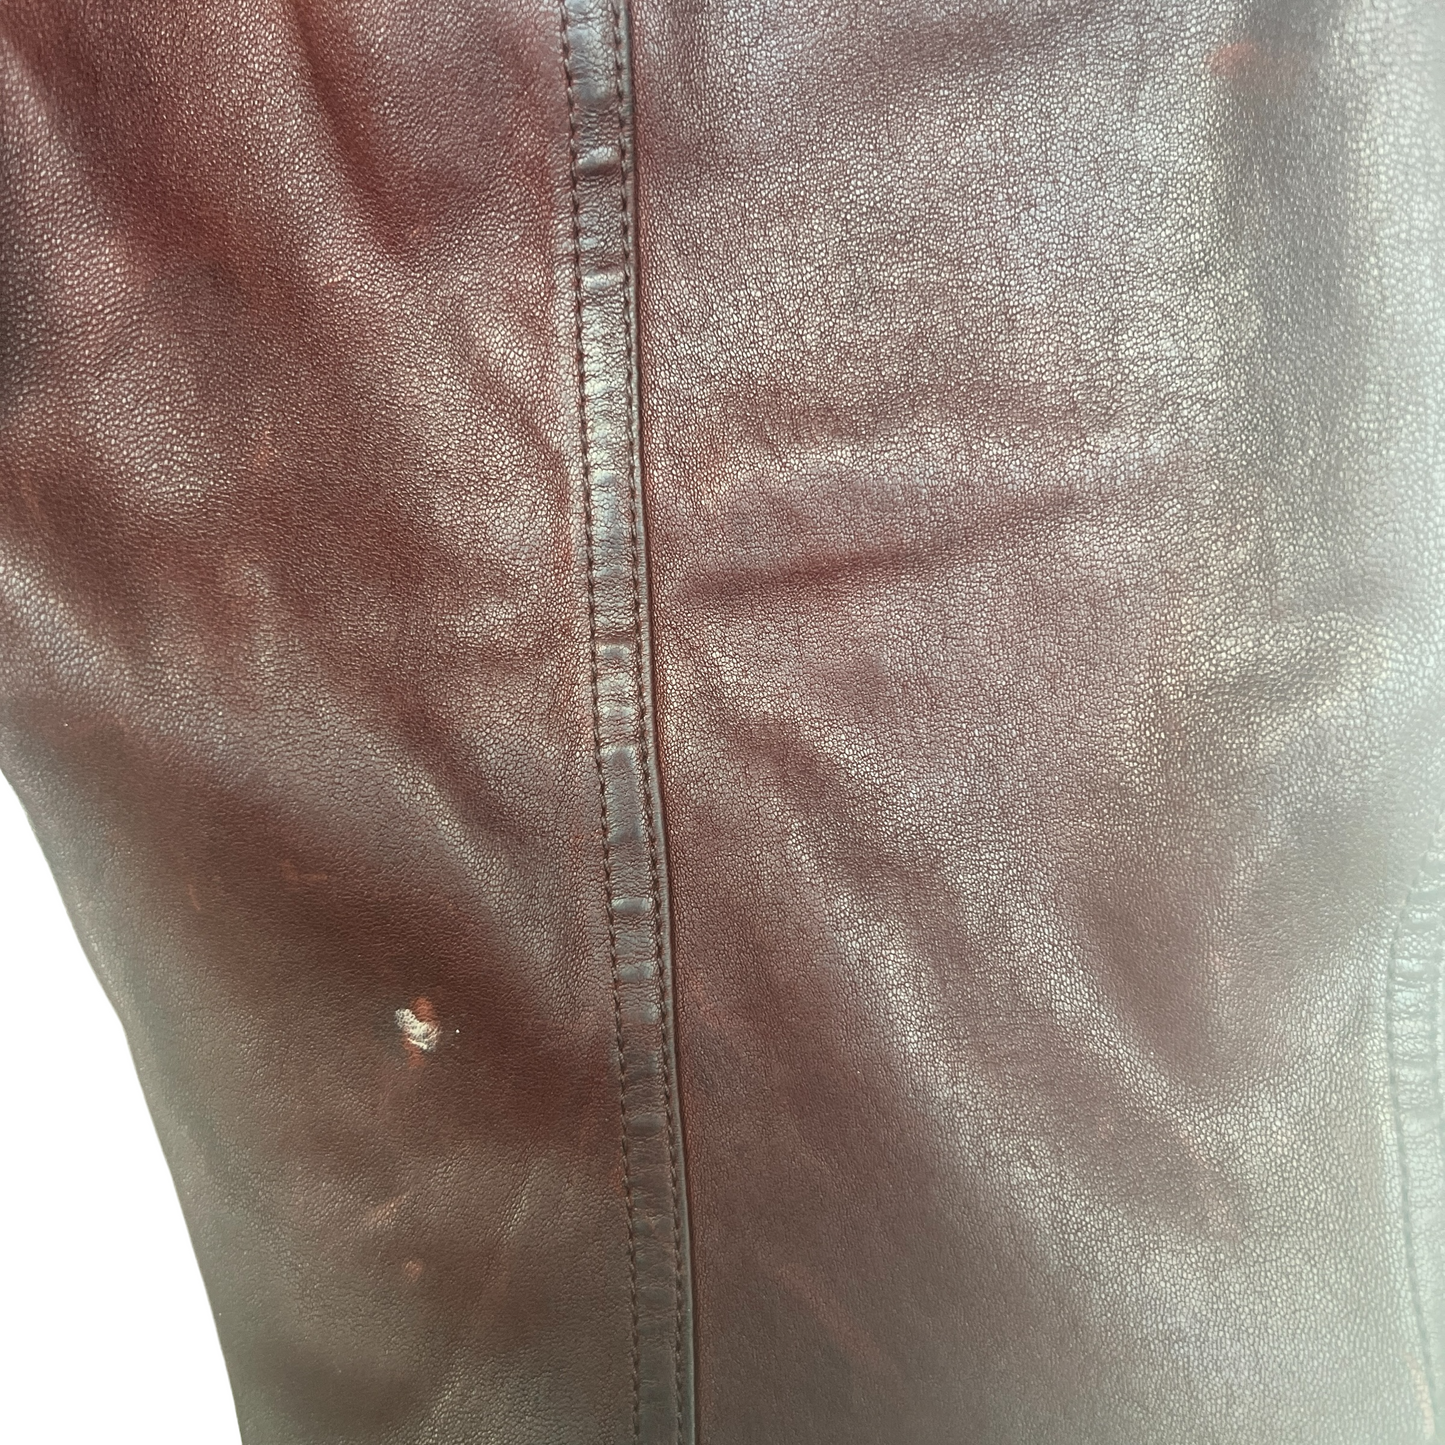 Deep Red Leather Pants - S